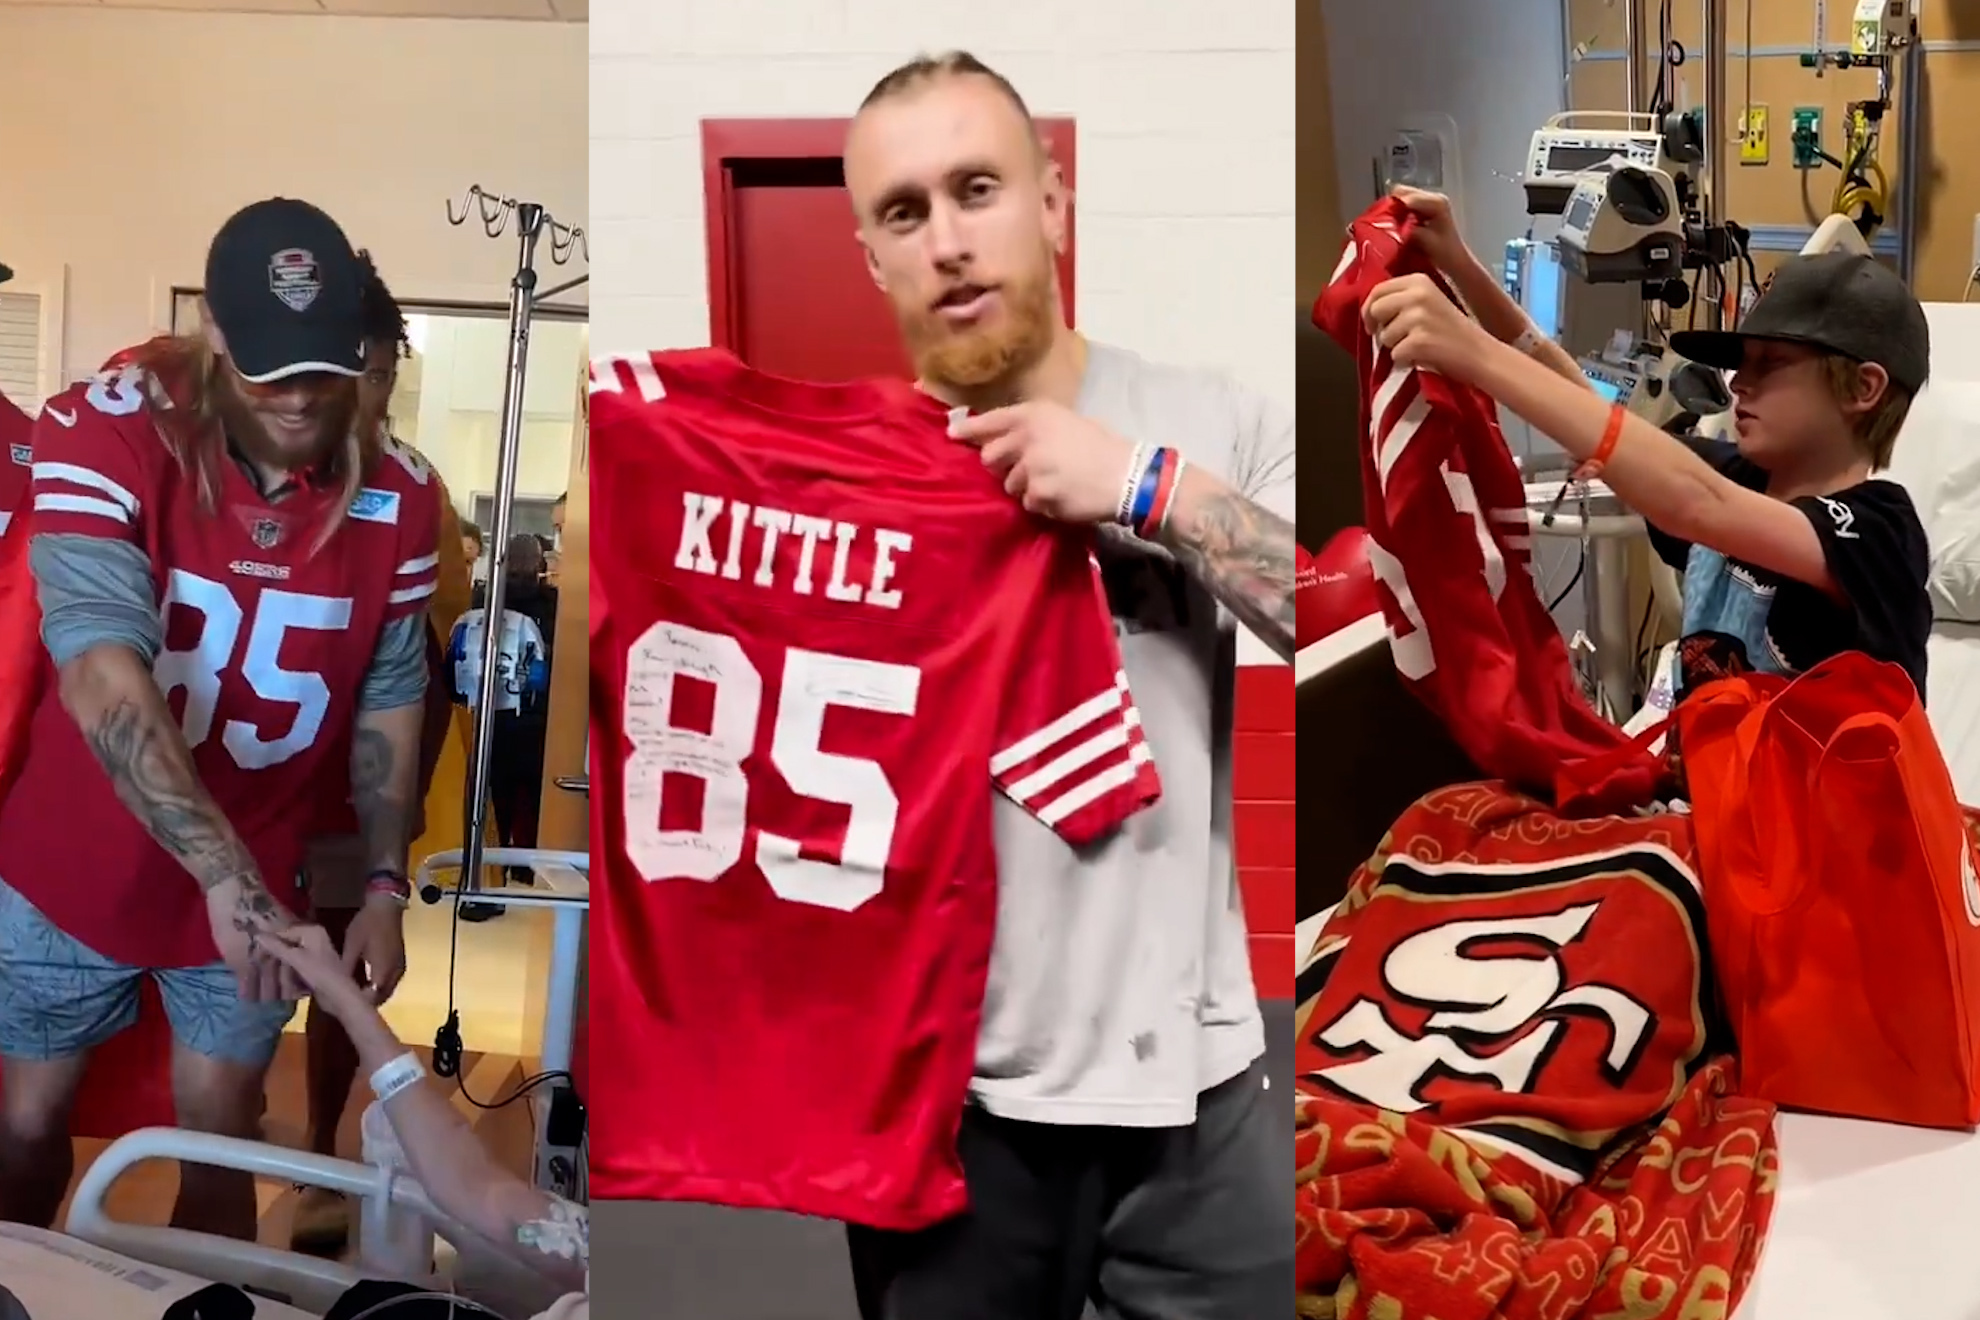 George Kittle, 49ers, shares a touching gesture with a child in the hospital